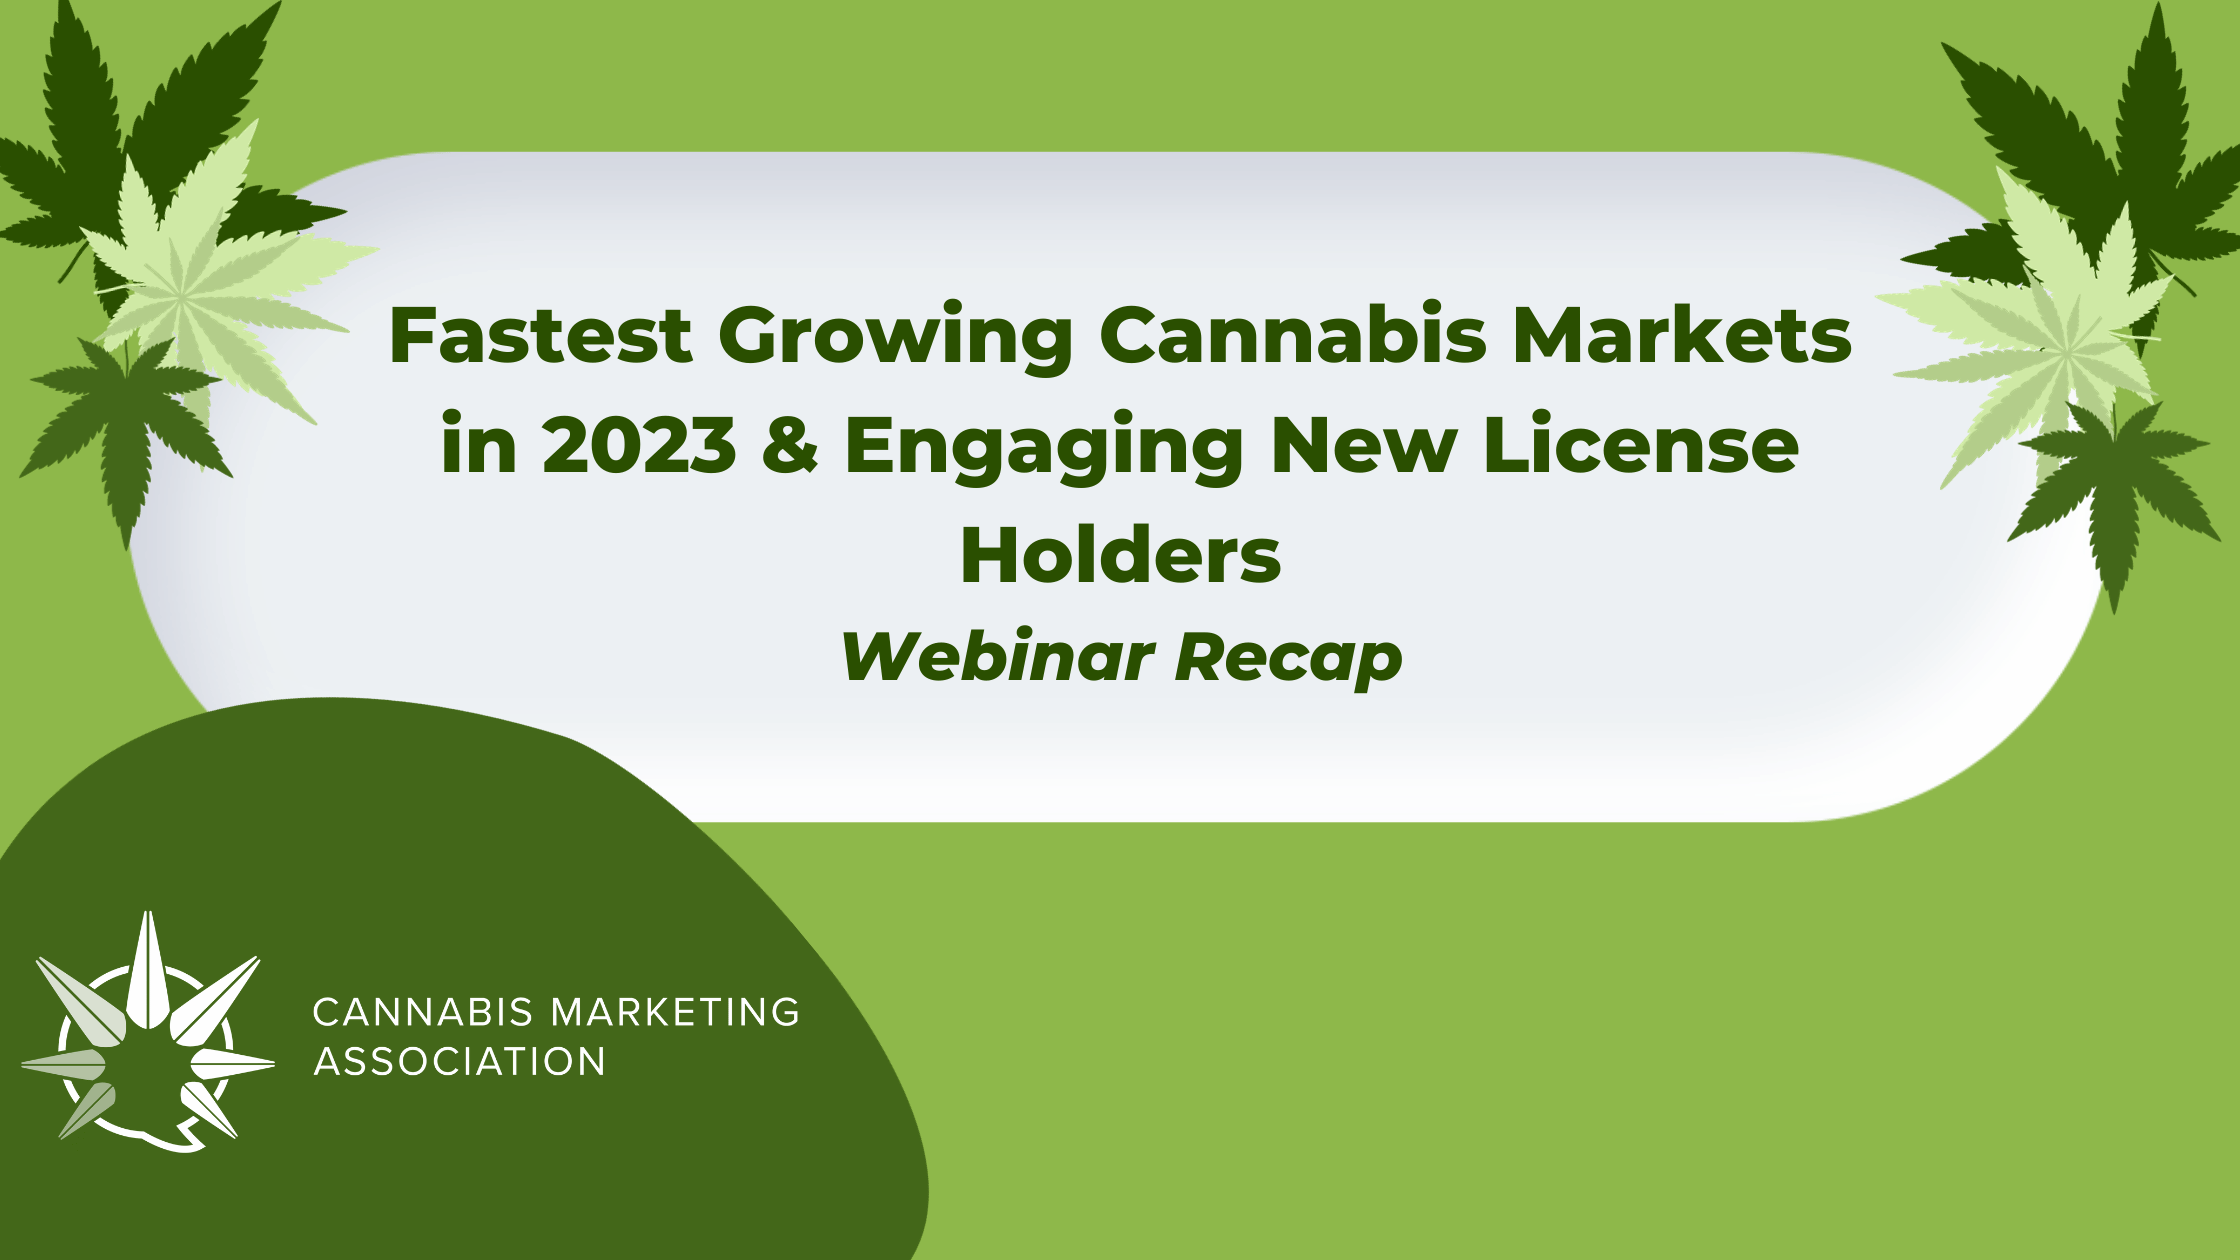 Fastest Growing Cannabis Markets in 2023 & Engaging New License Holders